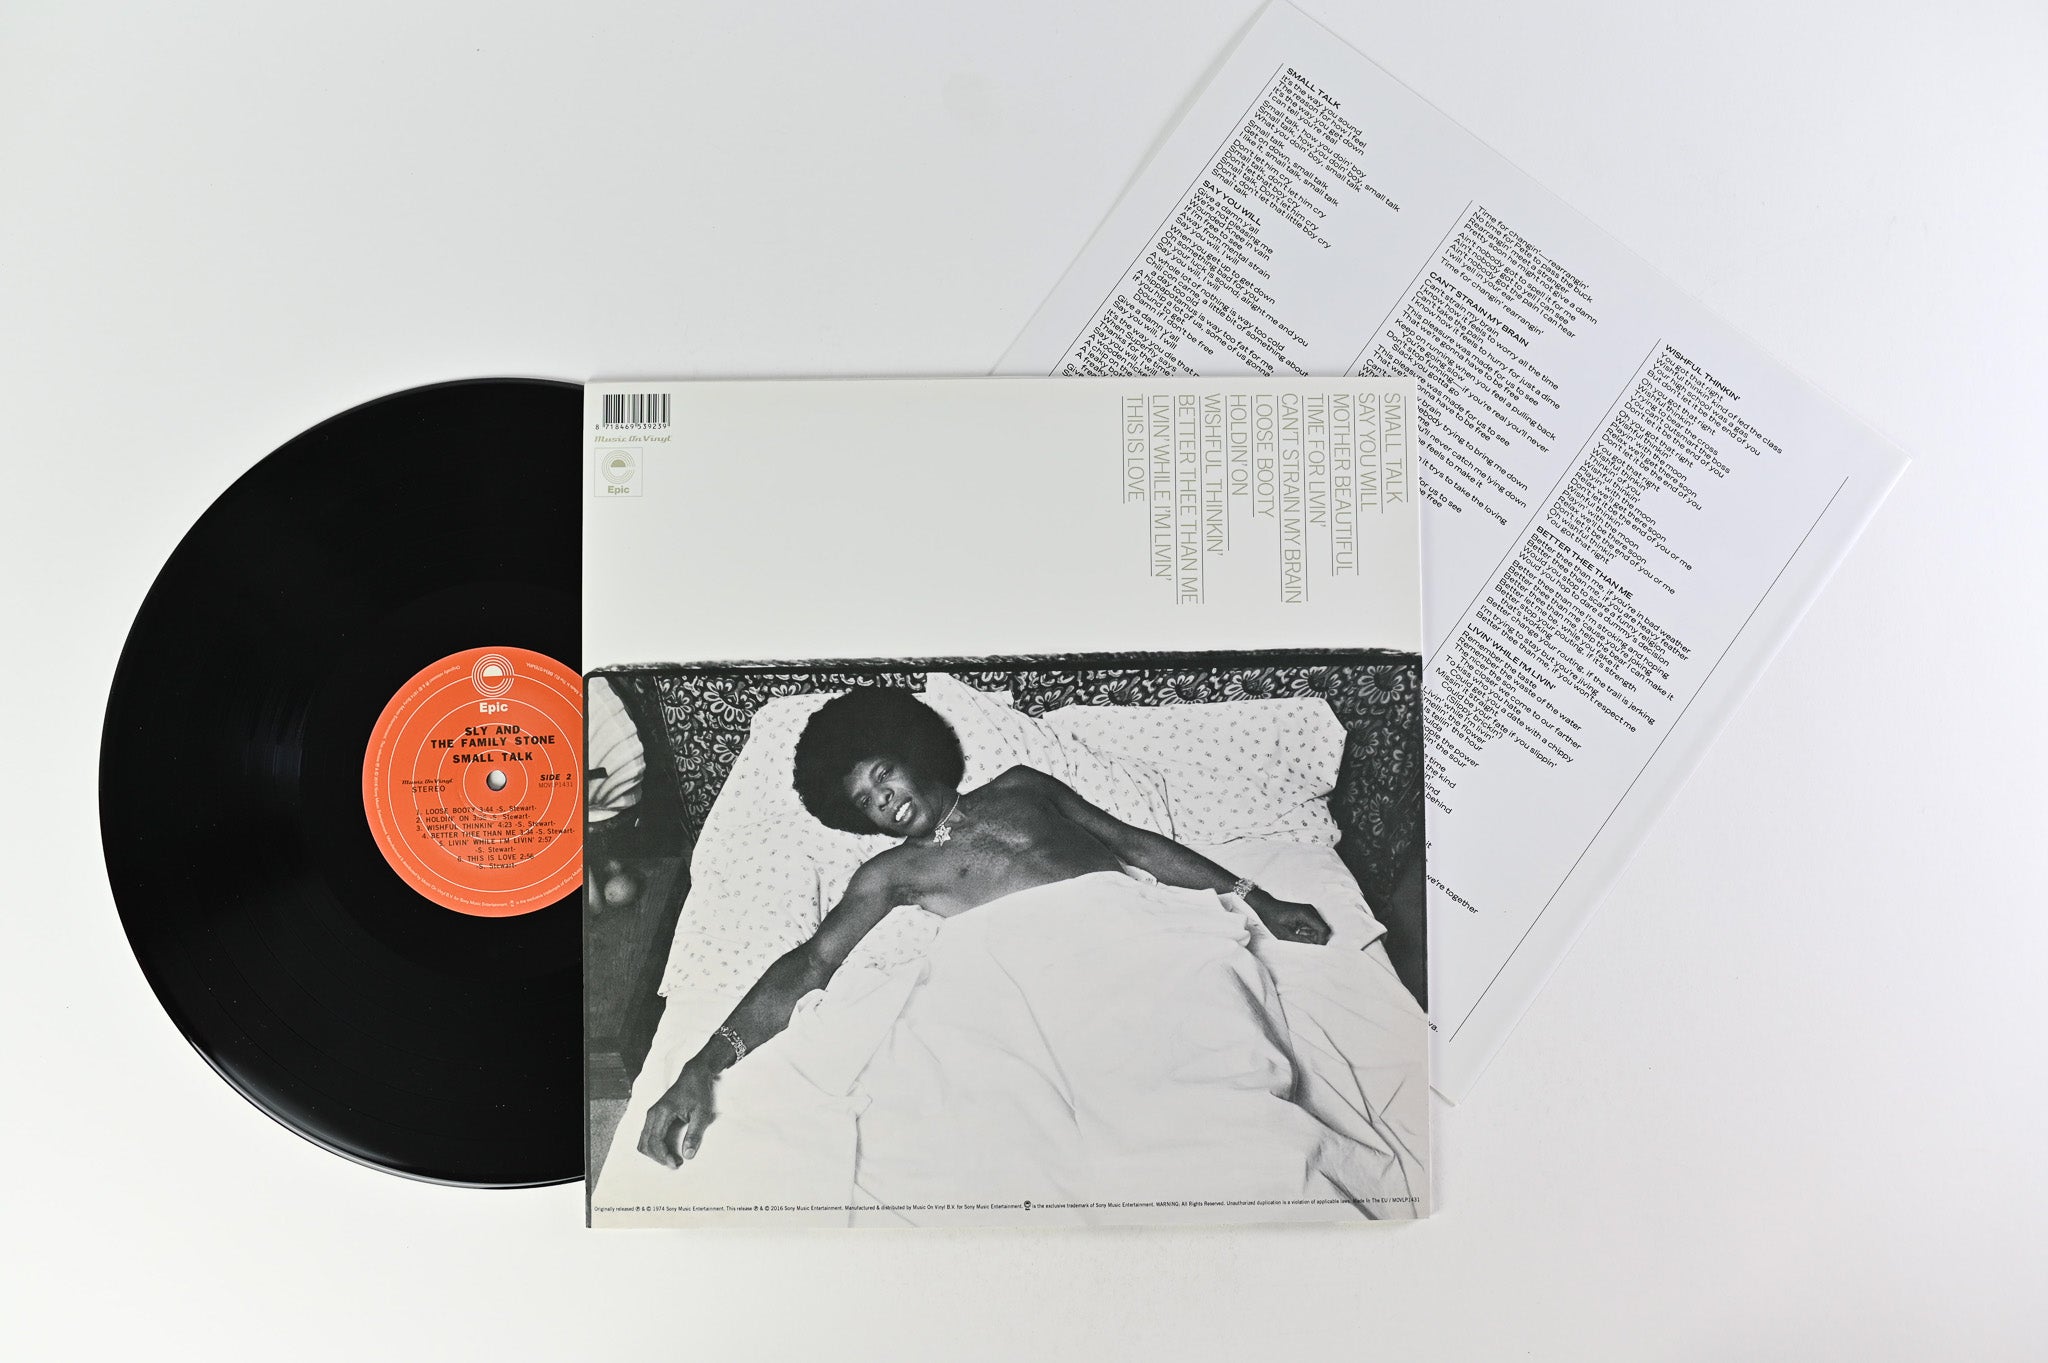 Sly & The Family Stone - Small Talk on Music On Vinyl Reissue